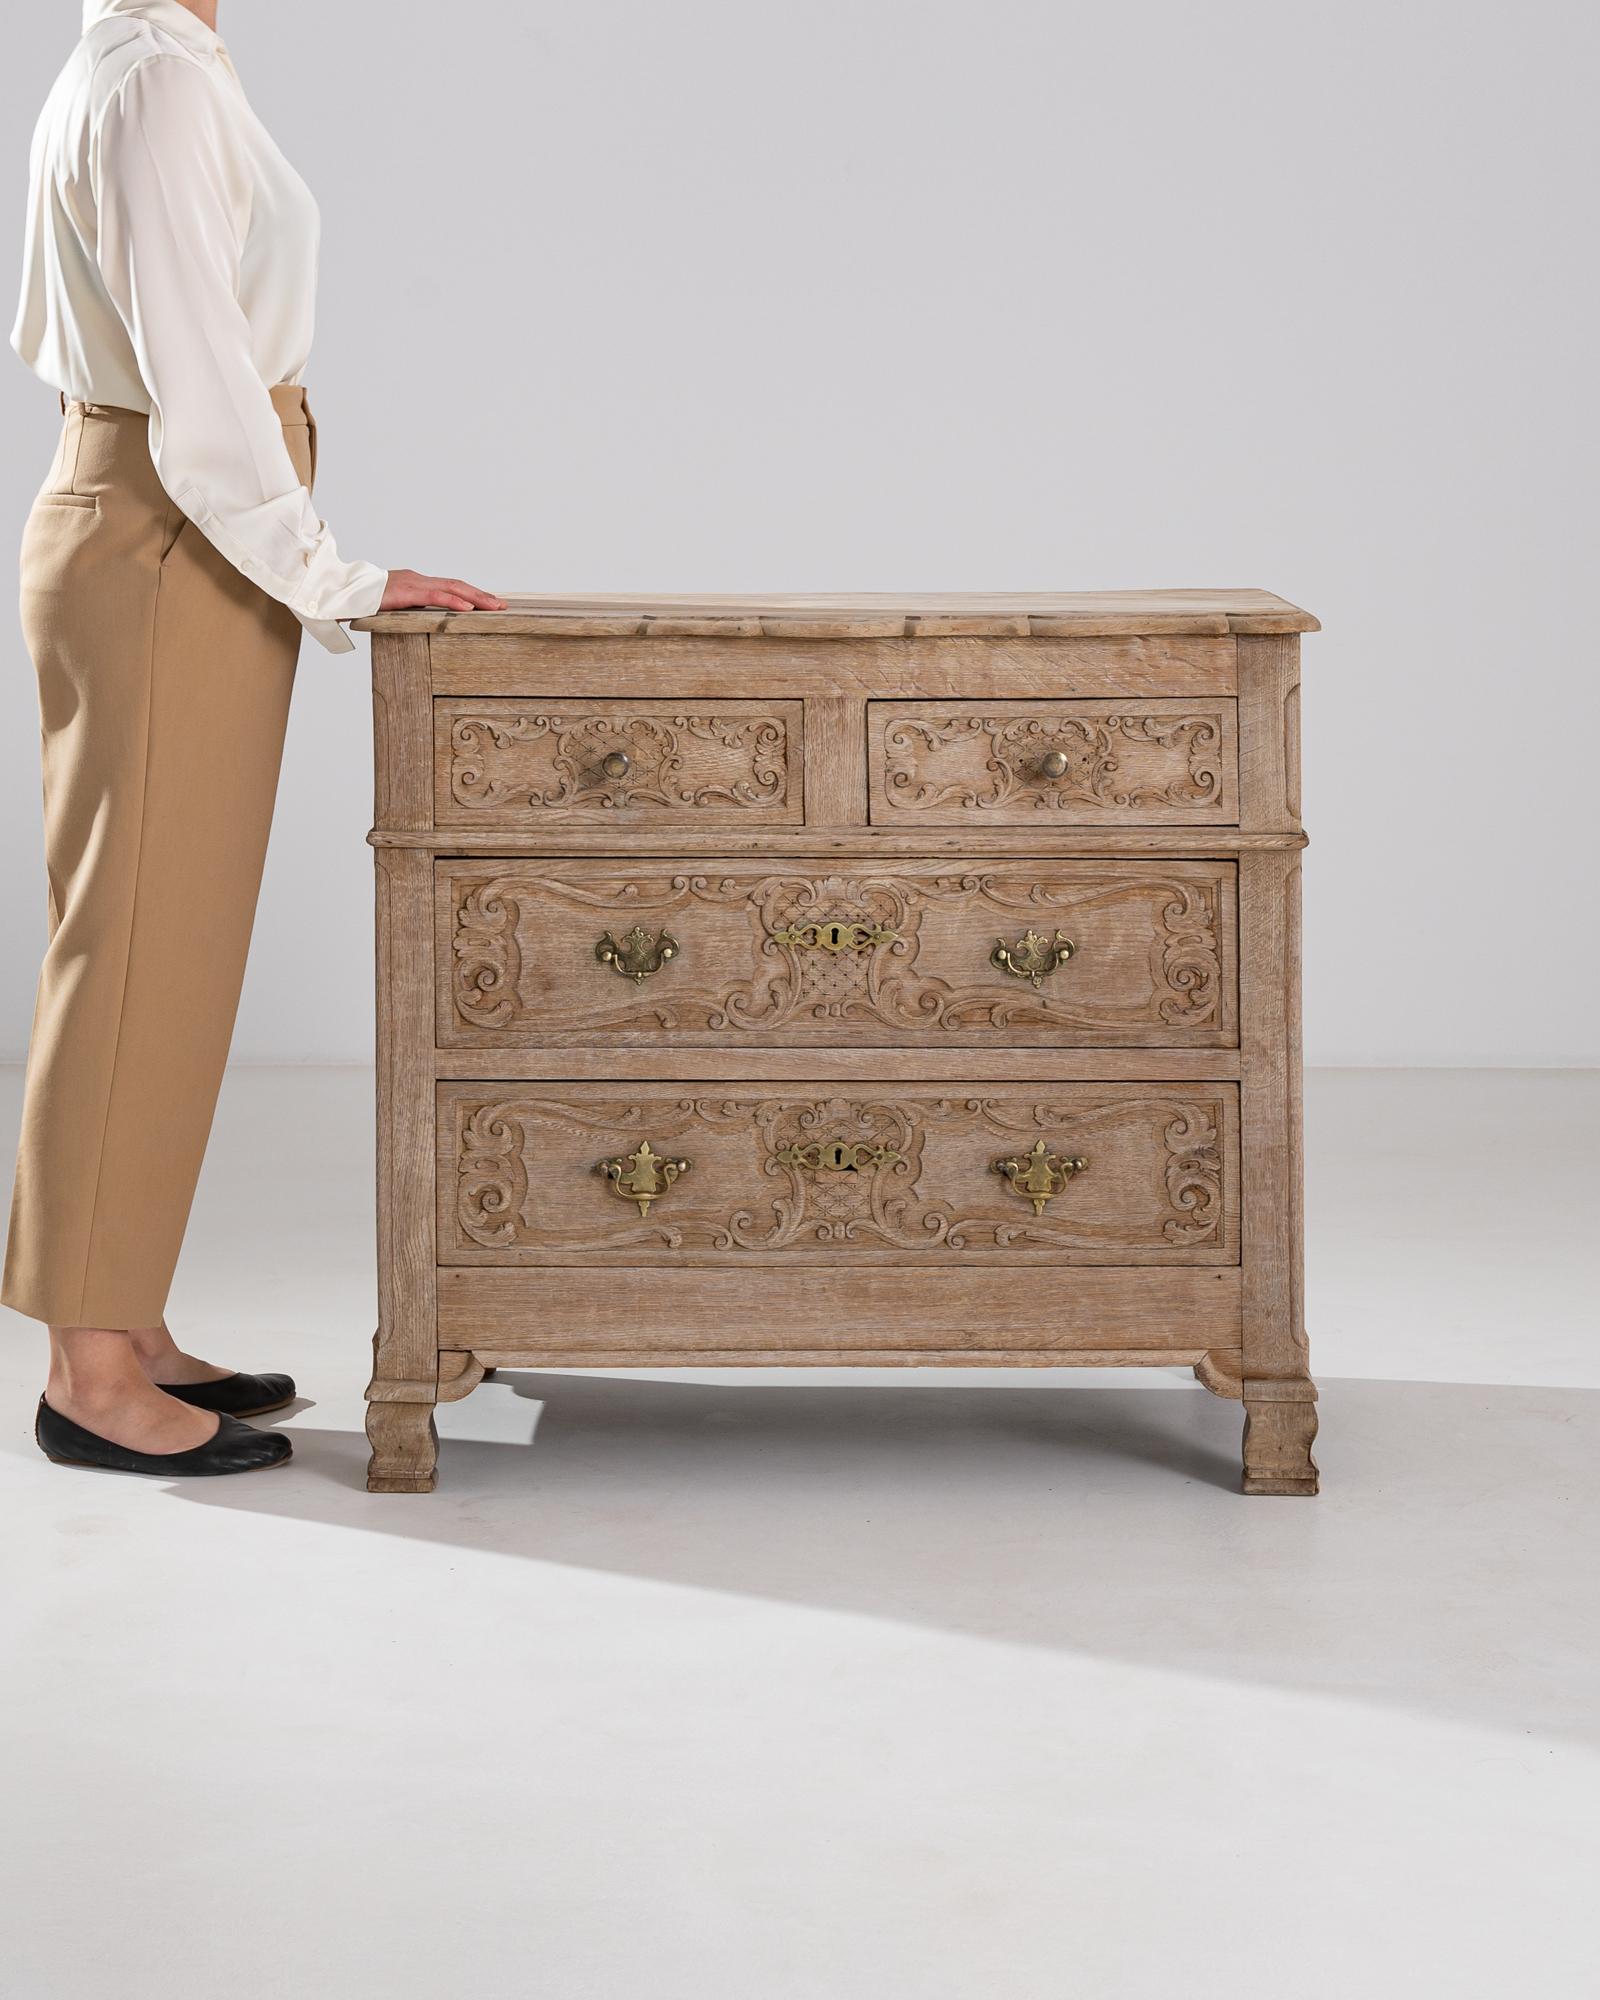 This 1900s French chest of drawers exudes a sense of historical charm and elegance. Crafted from bleached oak, the chest features a soft, natural finish that enhances the wood's timeless beauty. Intricately carved detailing adorns each drawer,